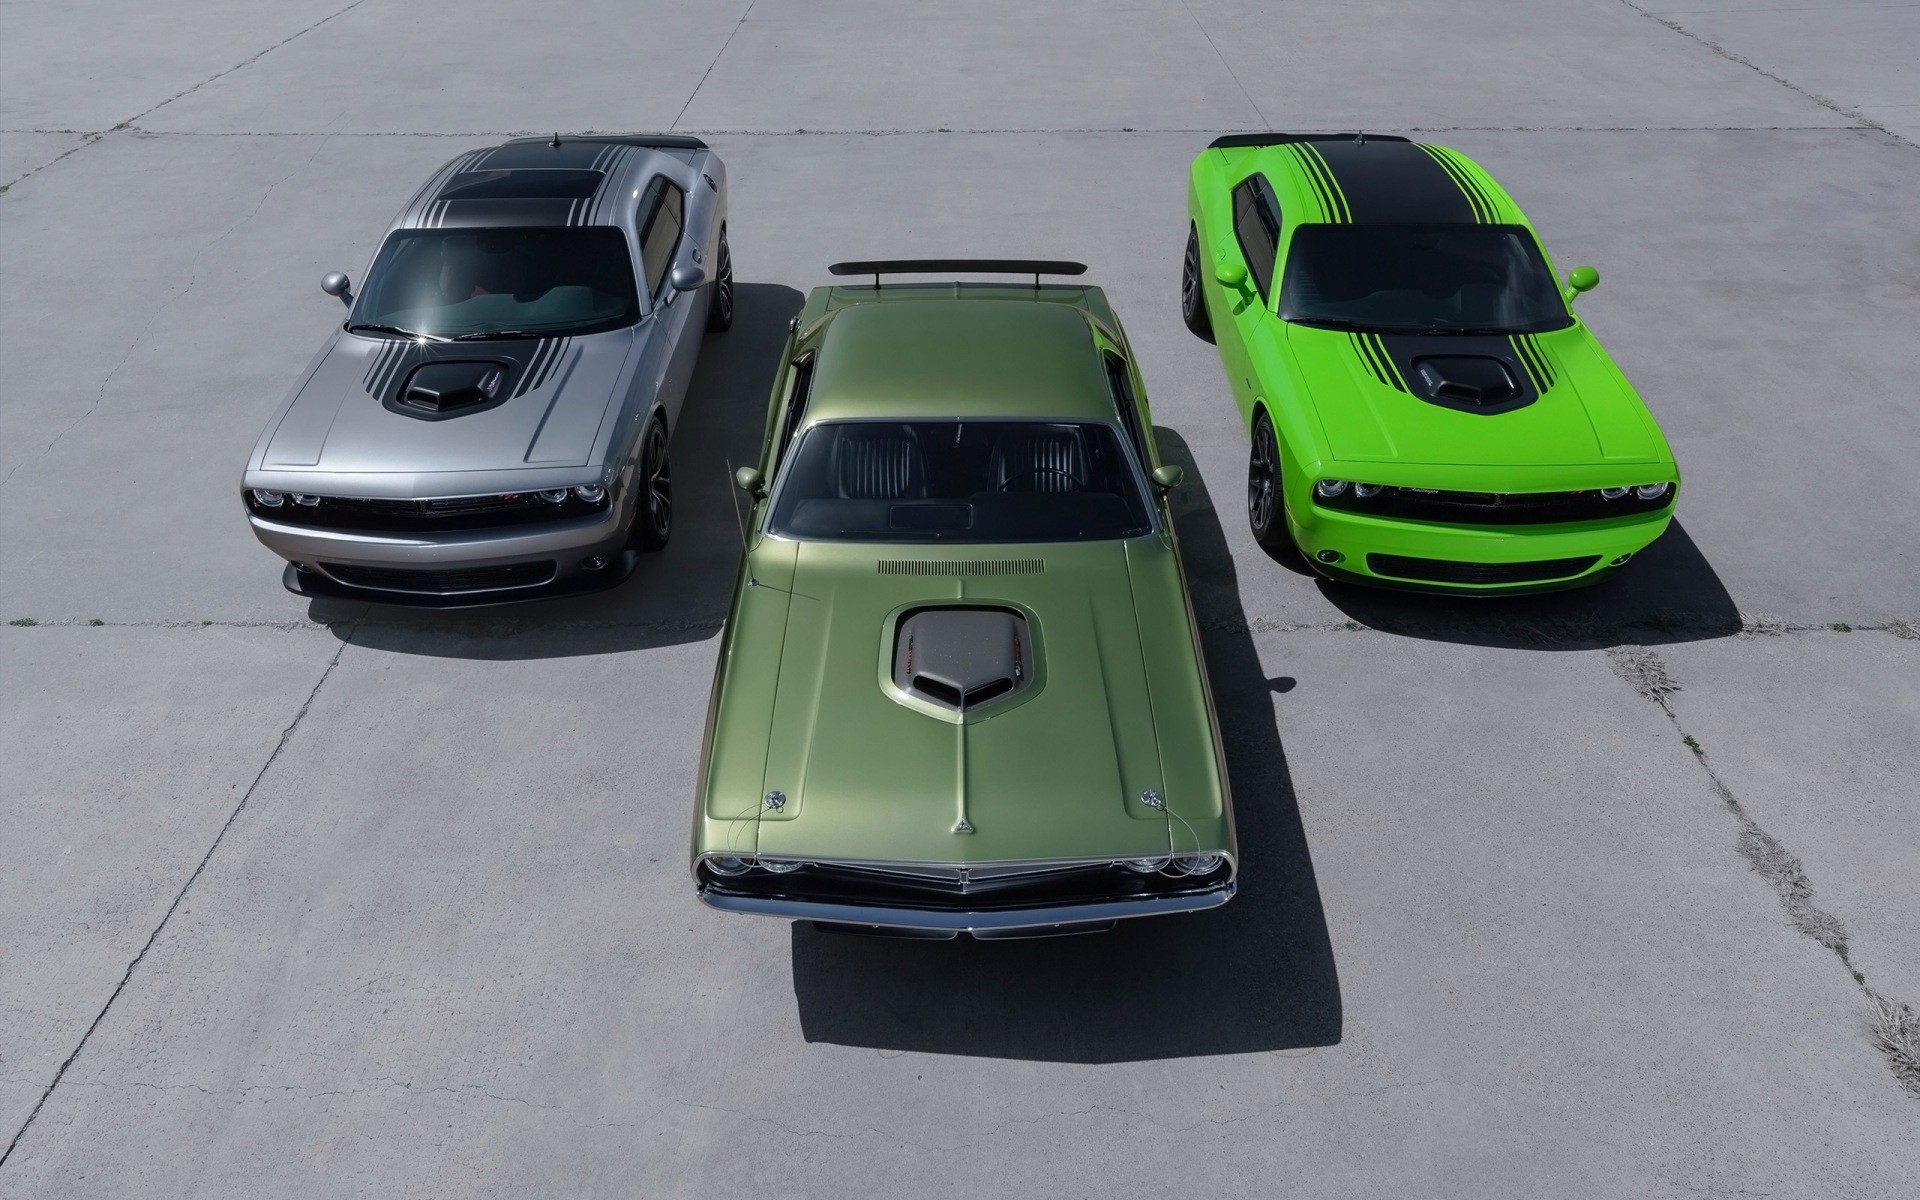 General 1920x1200 Dodge Challenger Dodge car green cars silver cars vehicle muscle cars American cars Stellantis